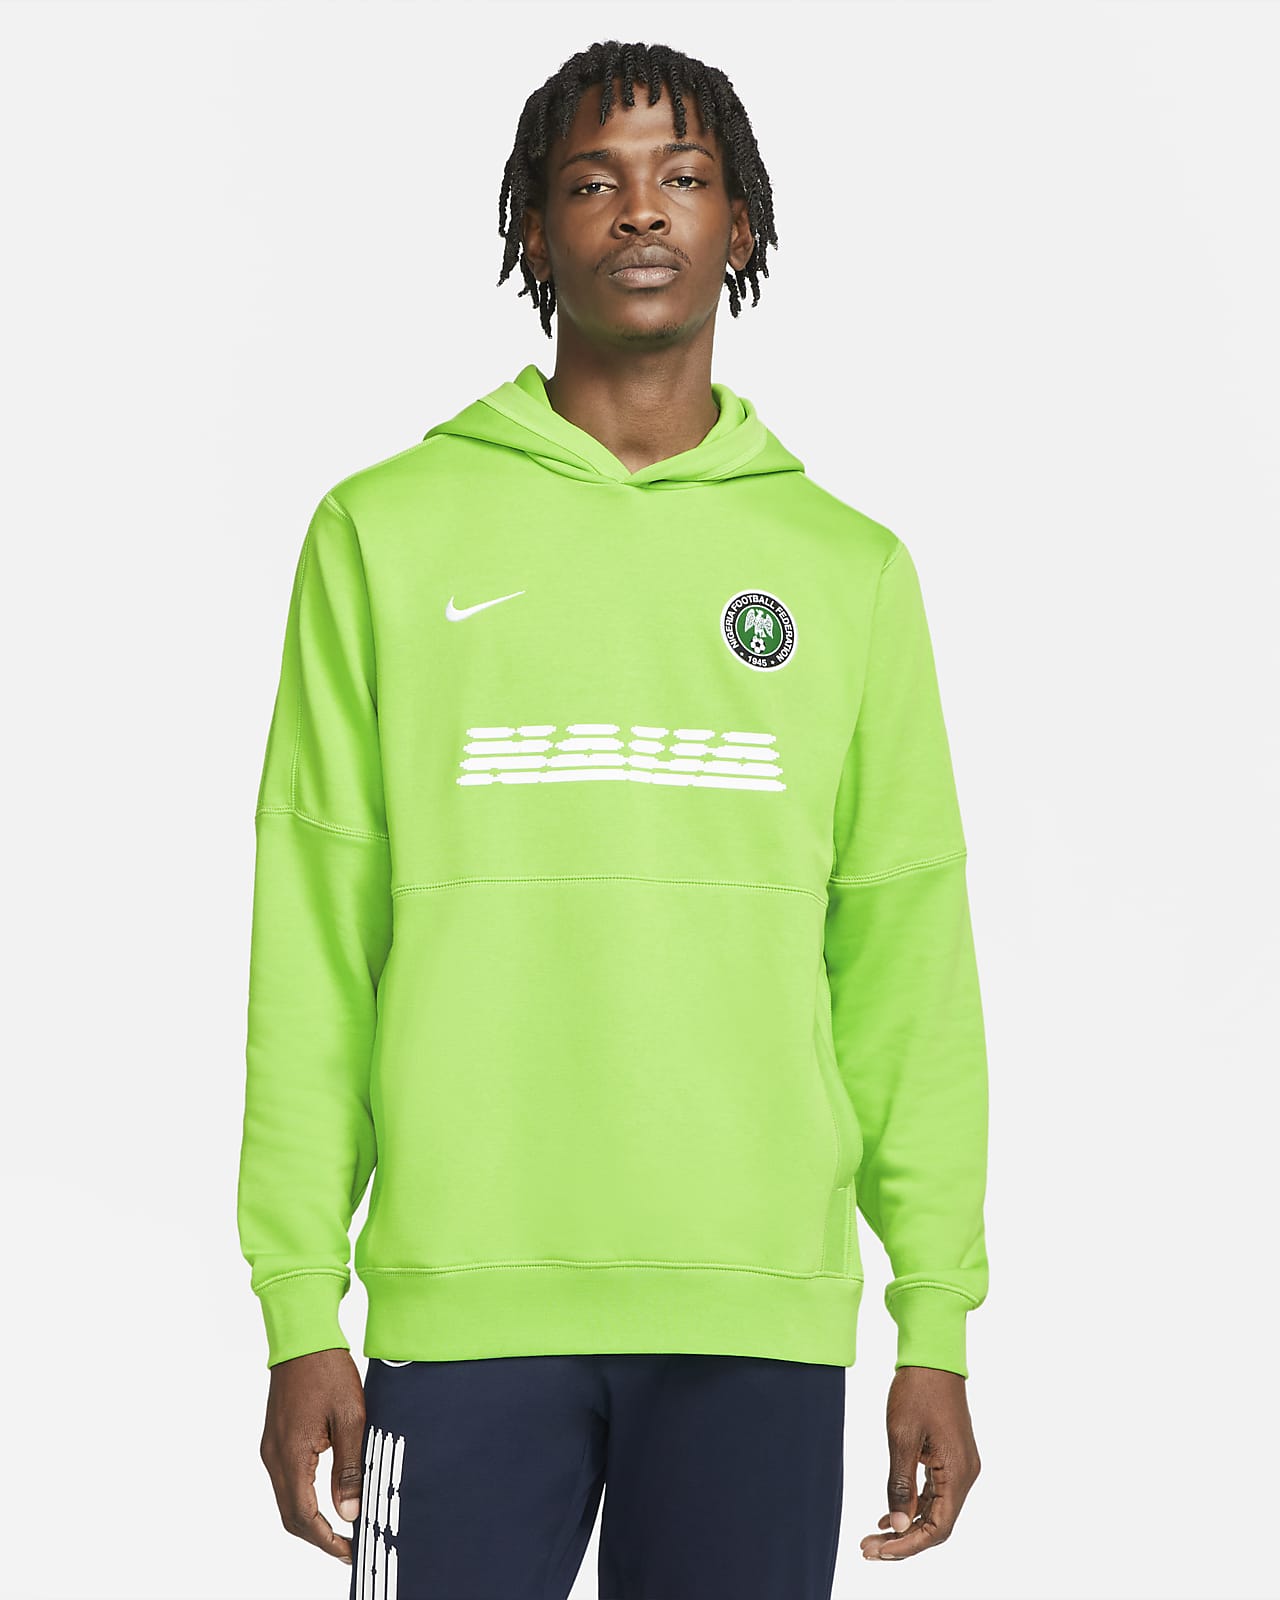 Men's French Terry Soccer Hoodie. Nike.com